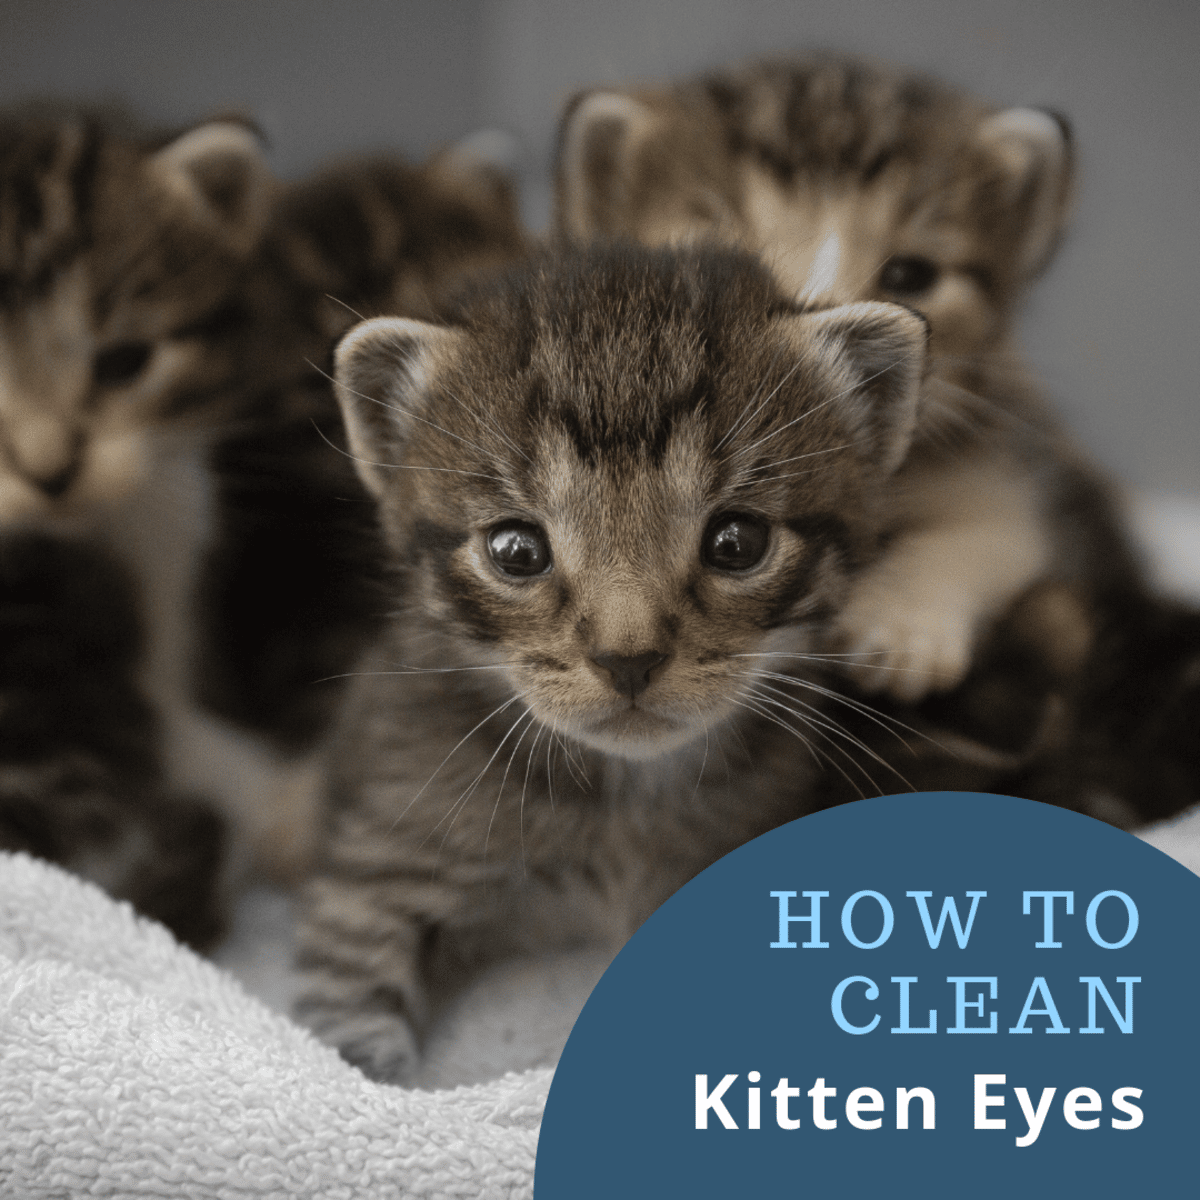 How to Clean Kitten Eyes That Are Matted Shut